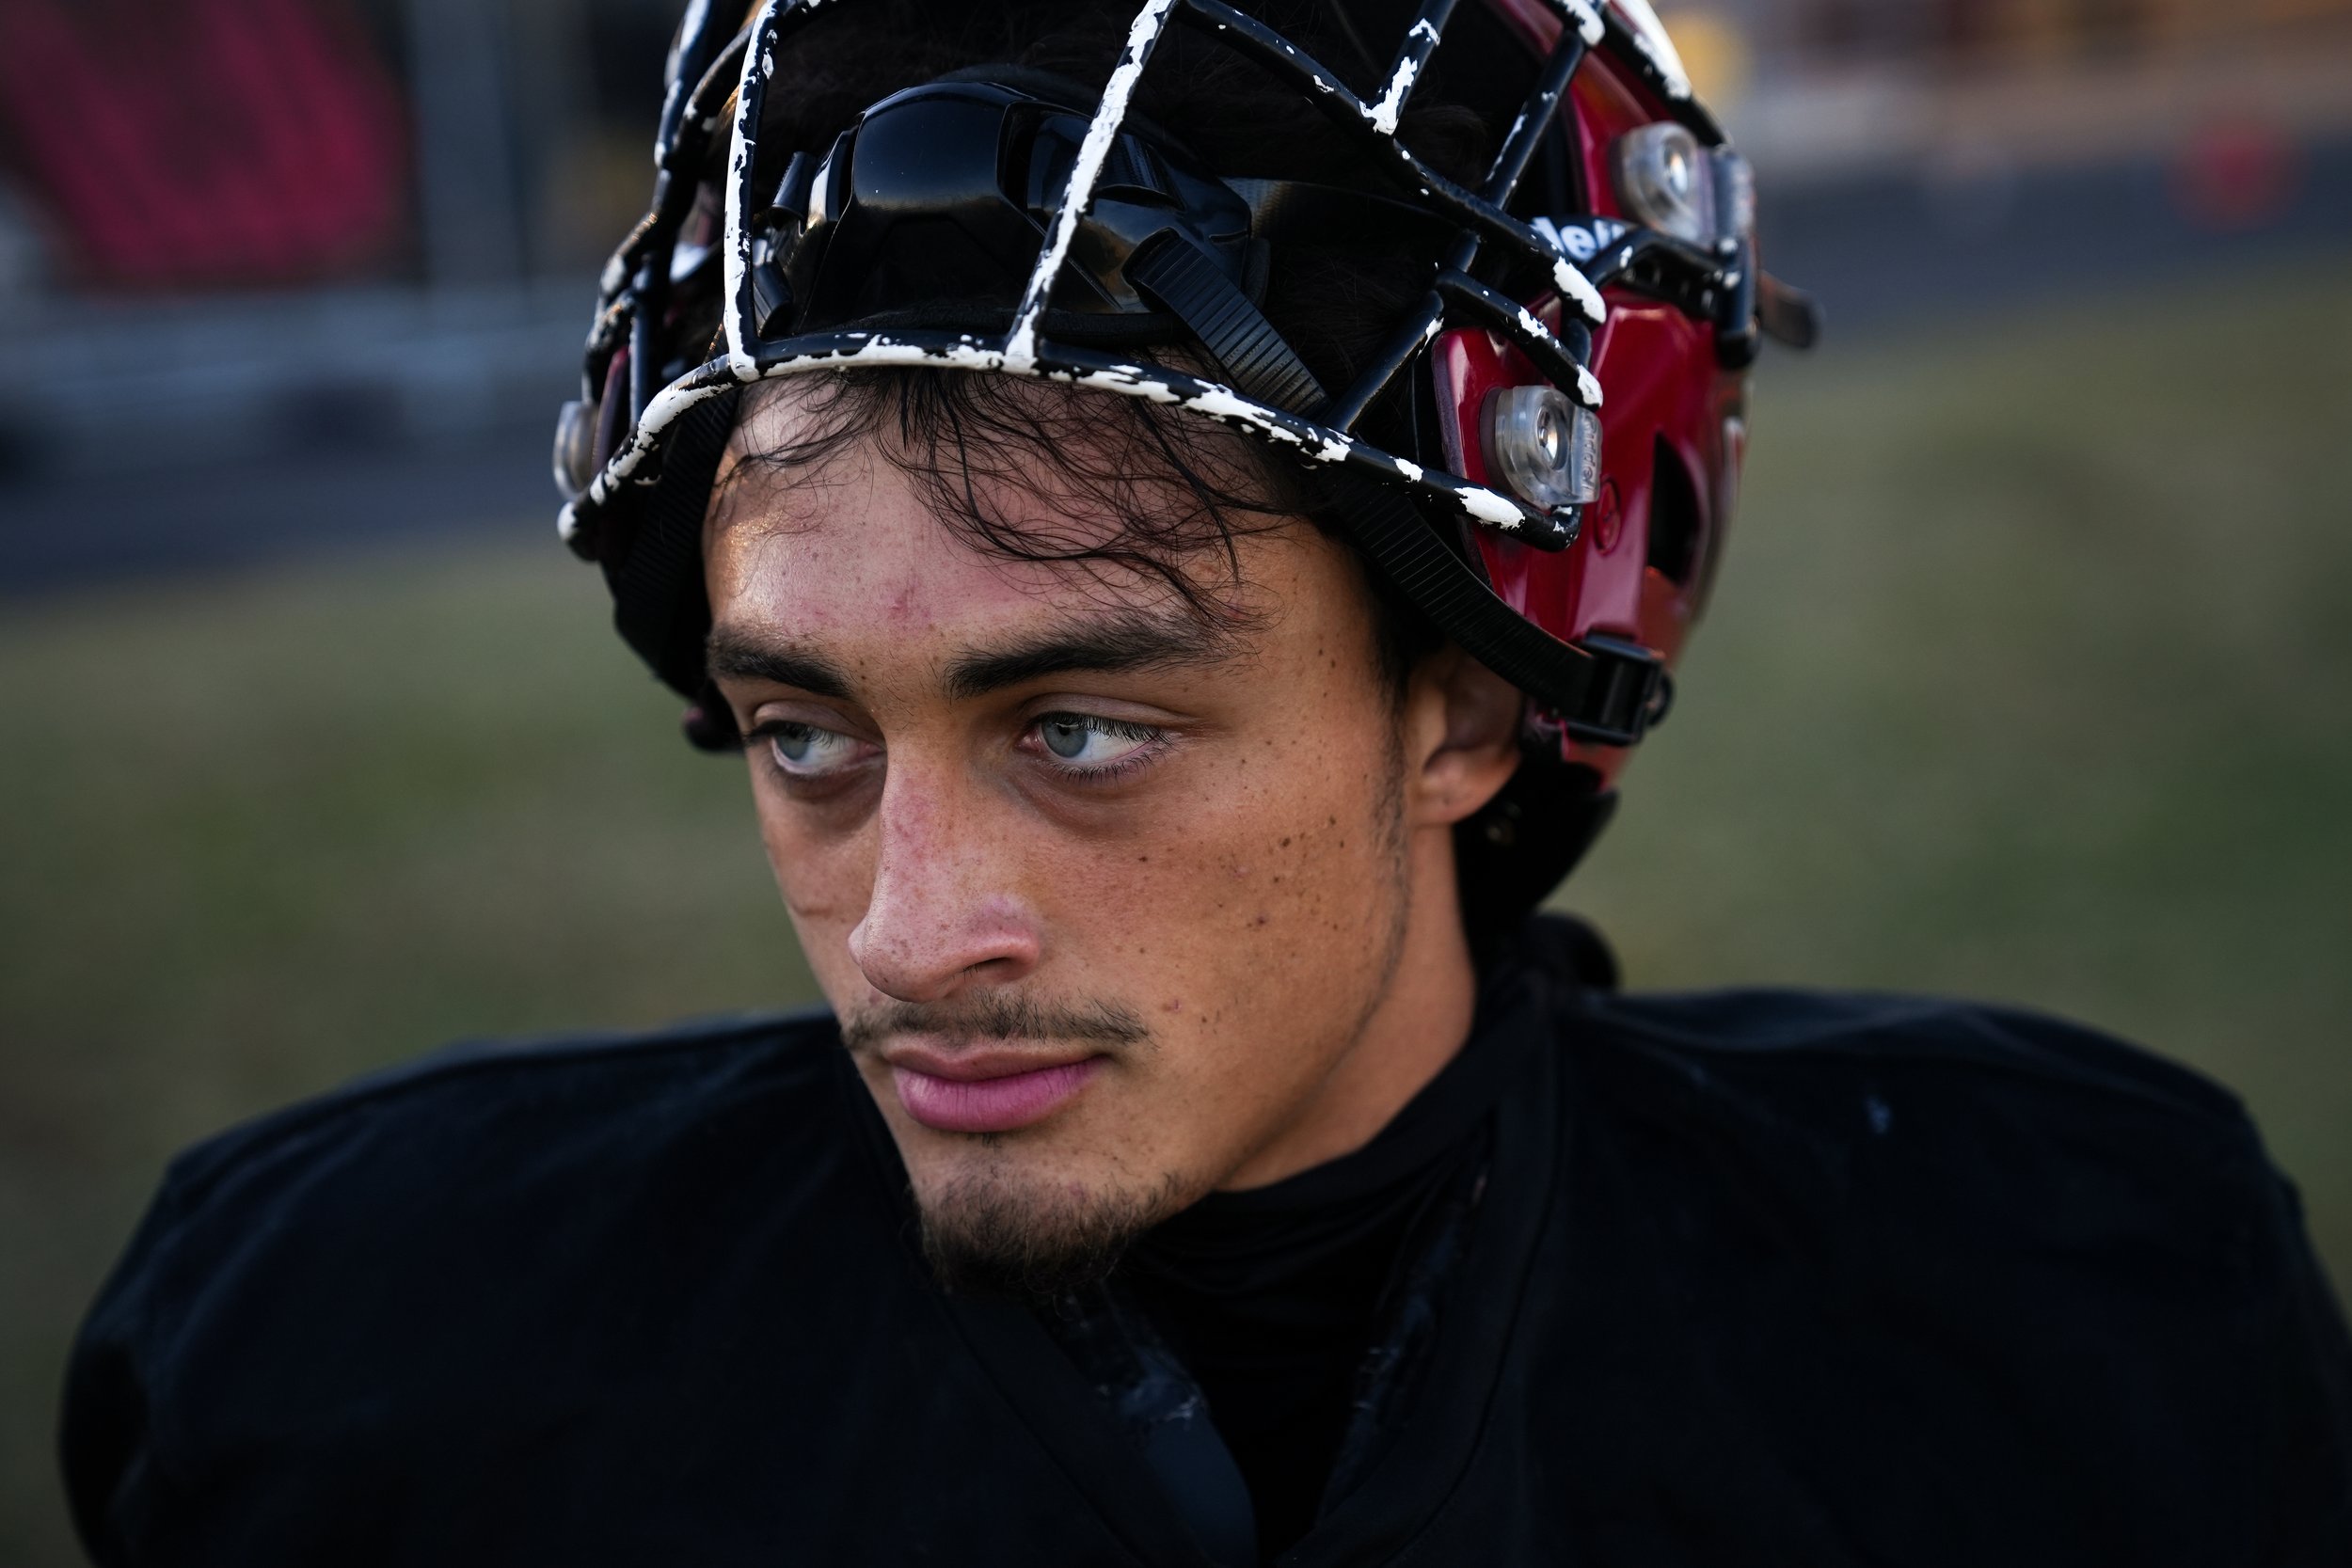  Liberty safety LJ Hunter watches as his teammates run play drills during practice at Liberty High School on Thursday, Nov. 17, 2022, in Peoria. Hunters mother, Angela Critser, 38, was killed in a drive-by shooting two years ago in Phoenix. Since the